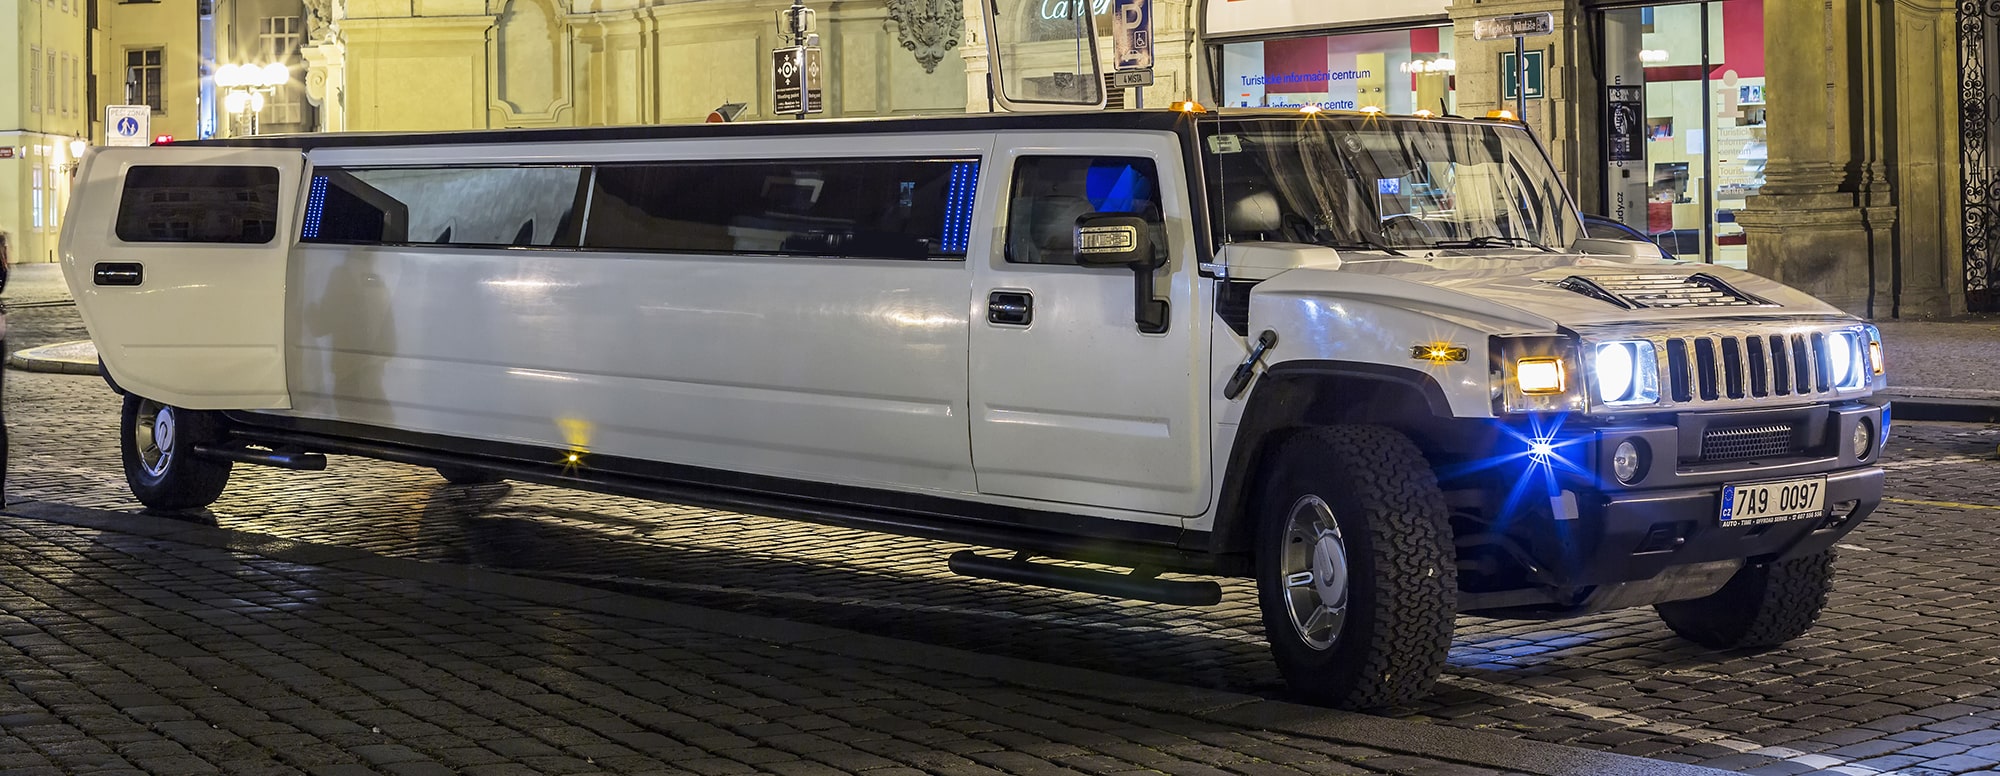 hummer h3 limo hire london